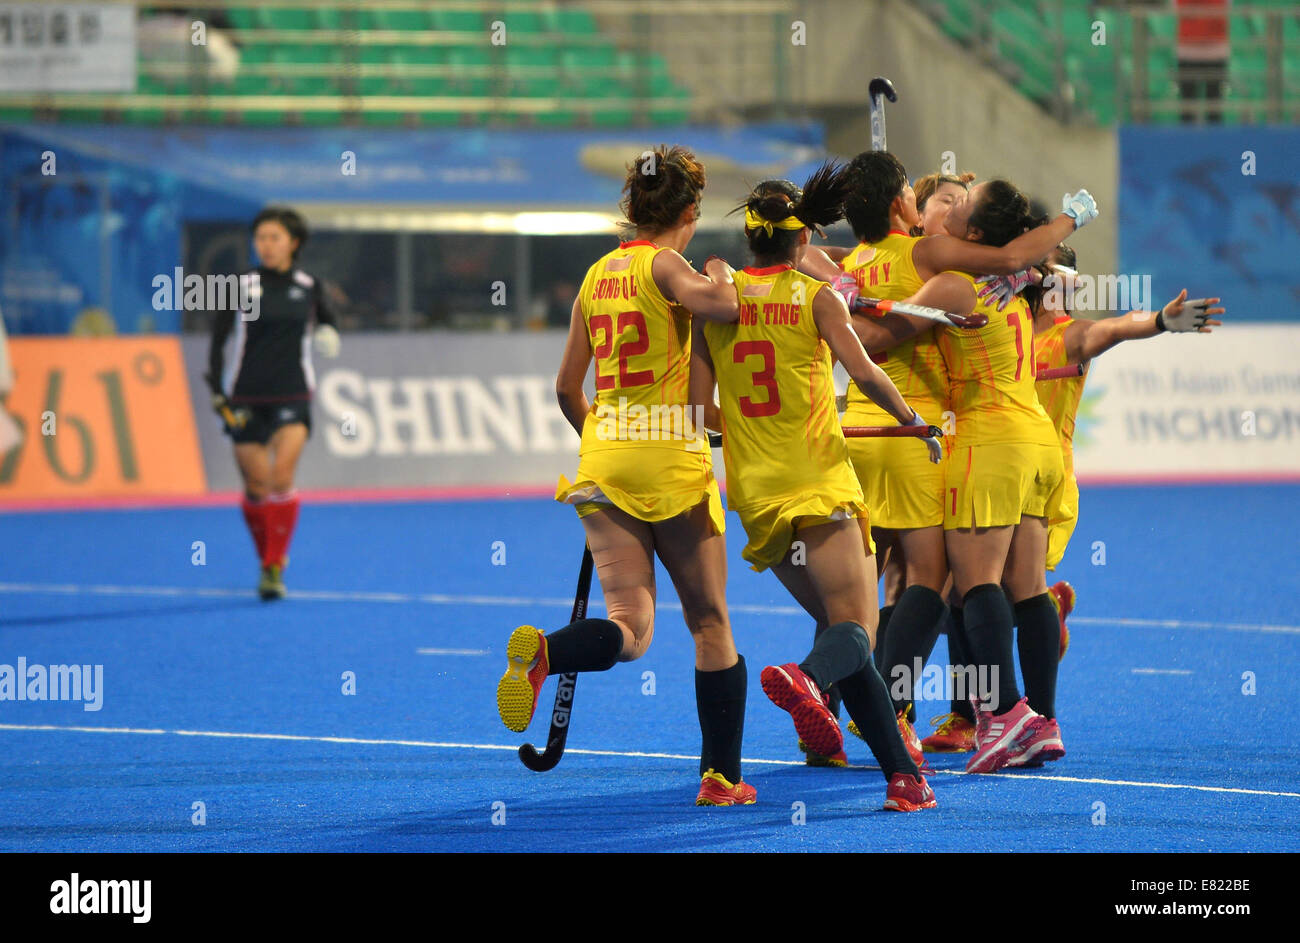 Incheon, South Korea. 29th Sep, 2014. Players of China celebrate after the women's hockey semifinal match against Japan at the 17th Asian Games in Incheon, South Korea, Sept. 29, 2014. China won 1-0. © Zhu Zheng/Xinhua/Alamy Live News Stock Photo